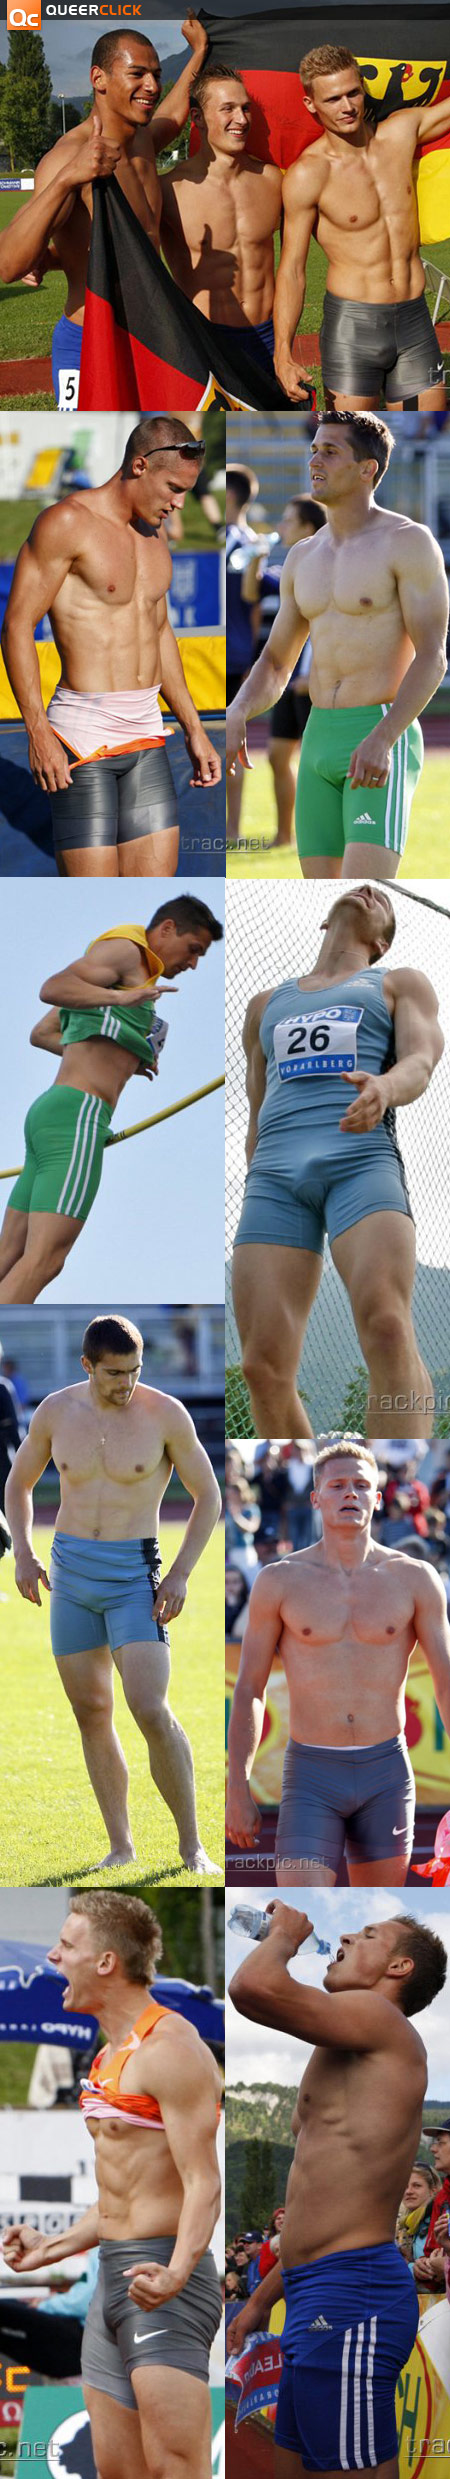 Dickathlon Pics Sure To Increase Your Heart Rate